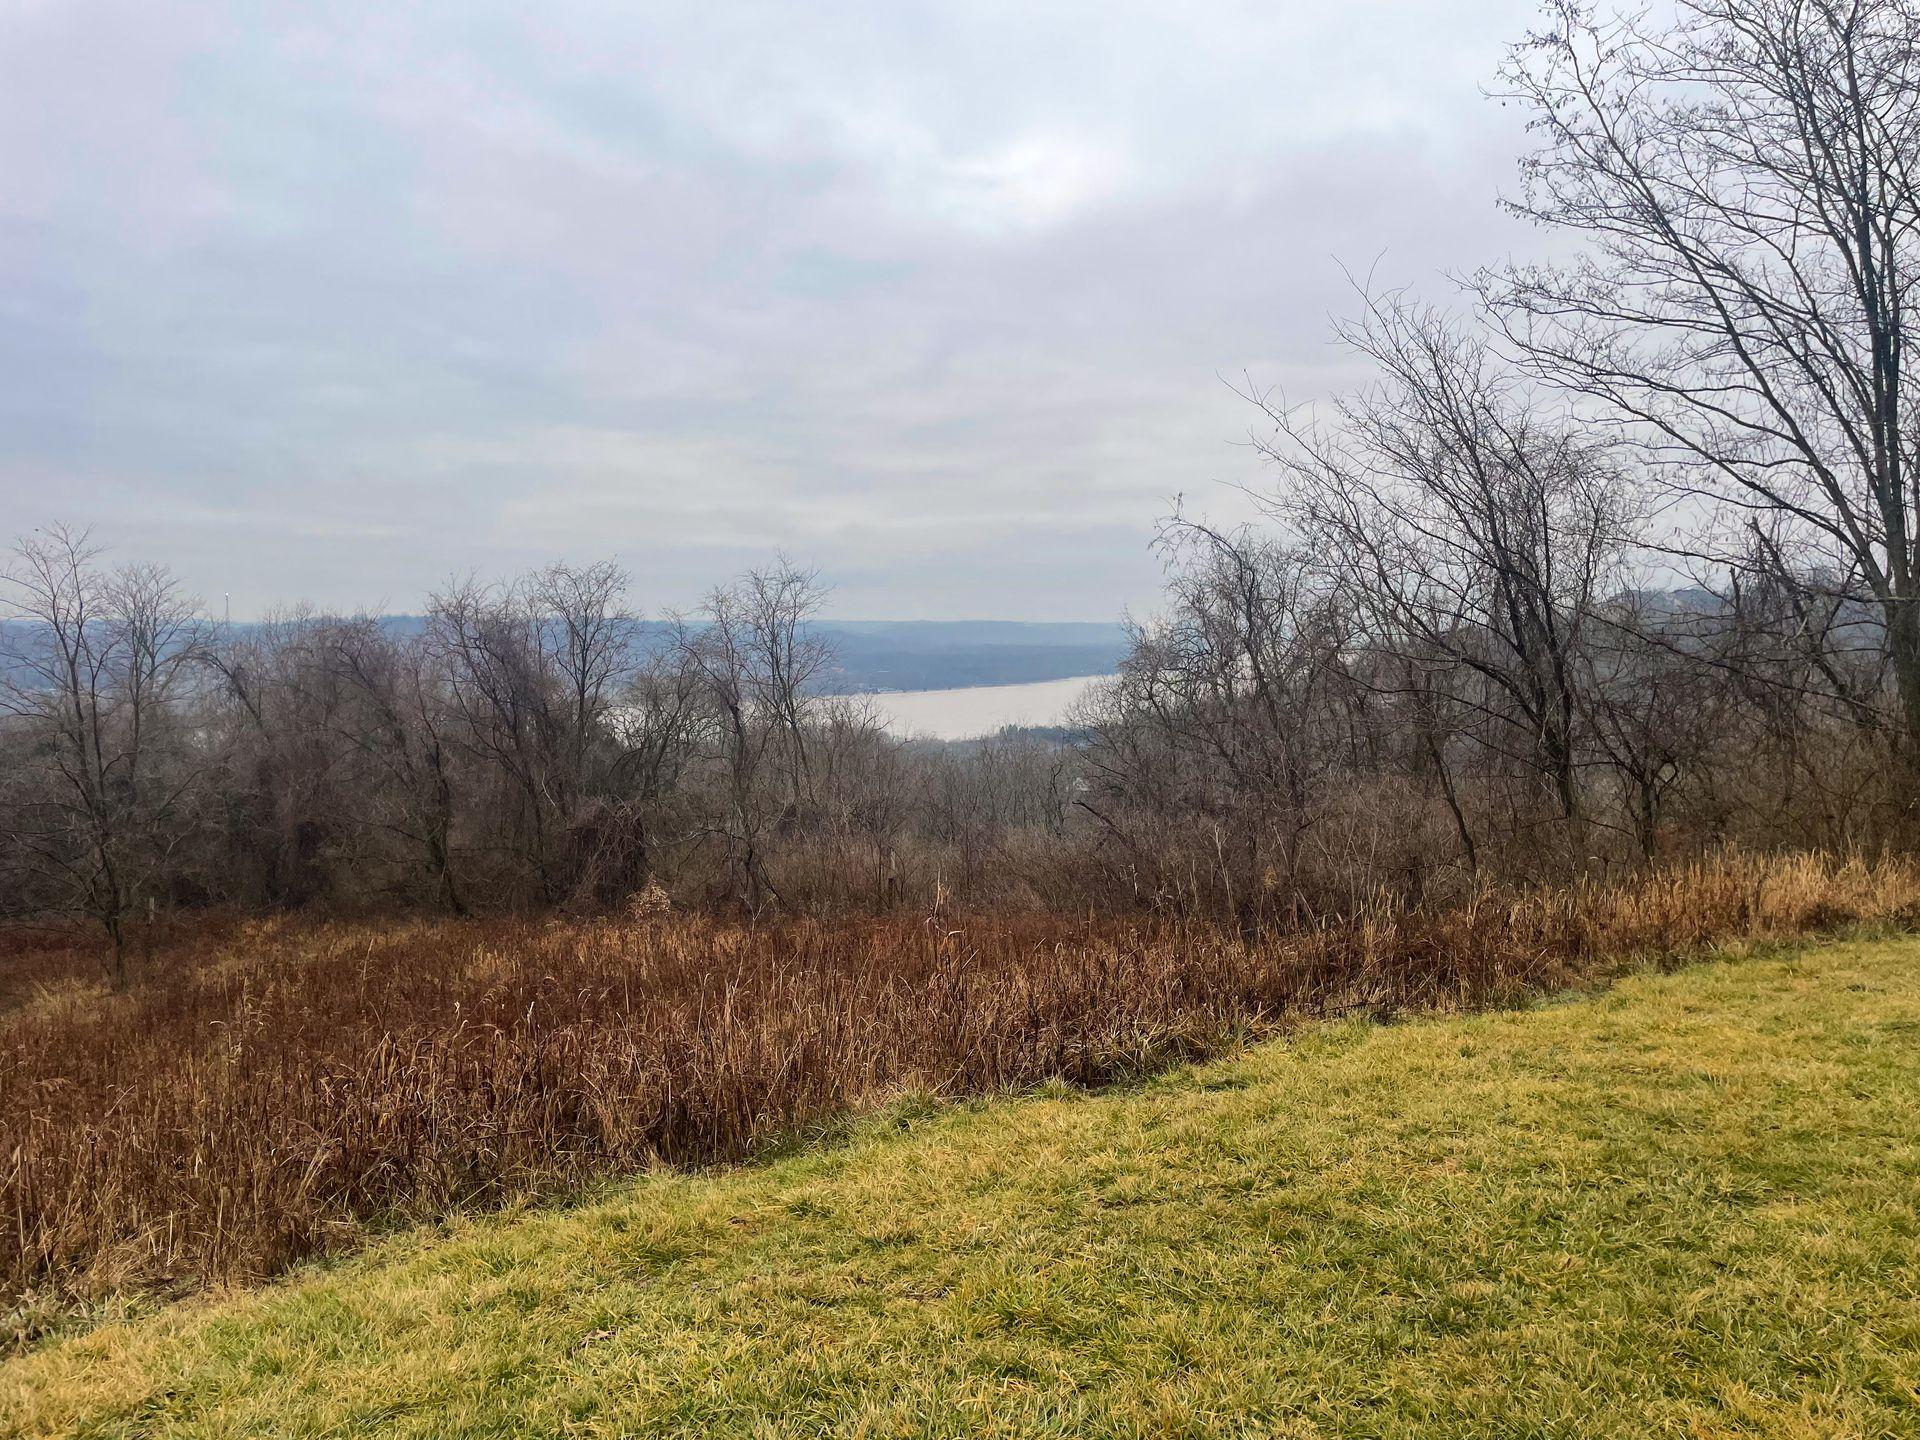 A view of the Ohio River from Woodland Mound